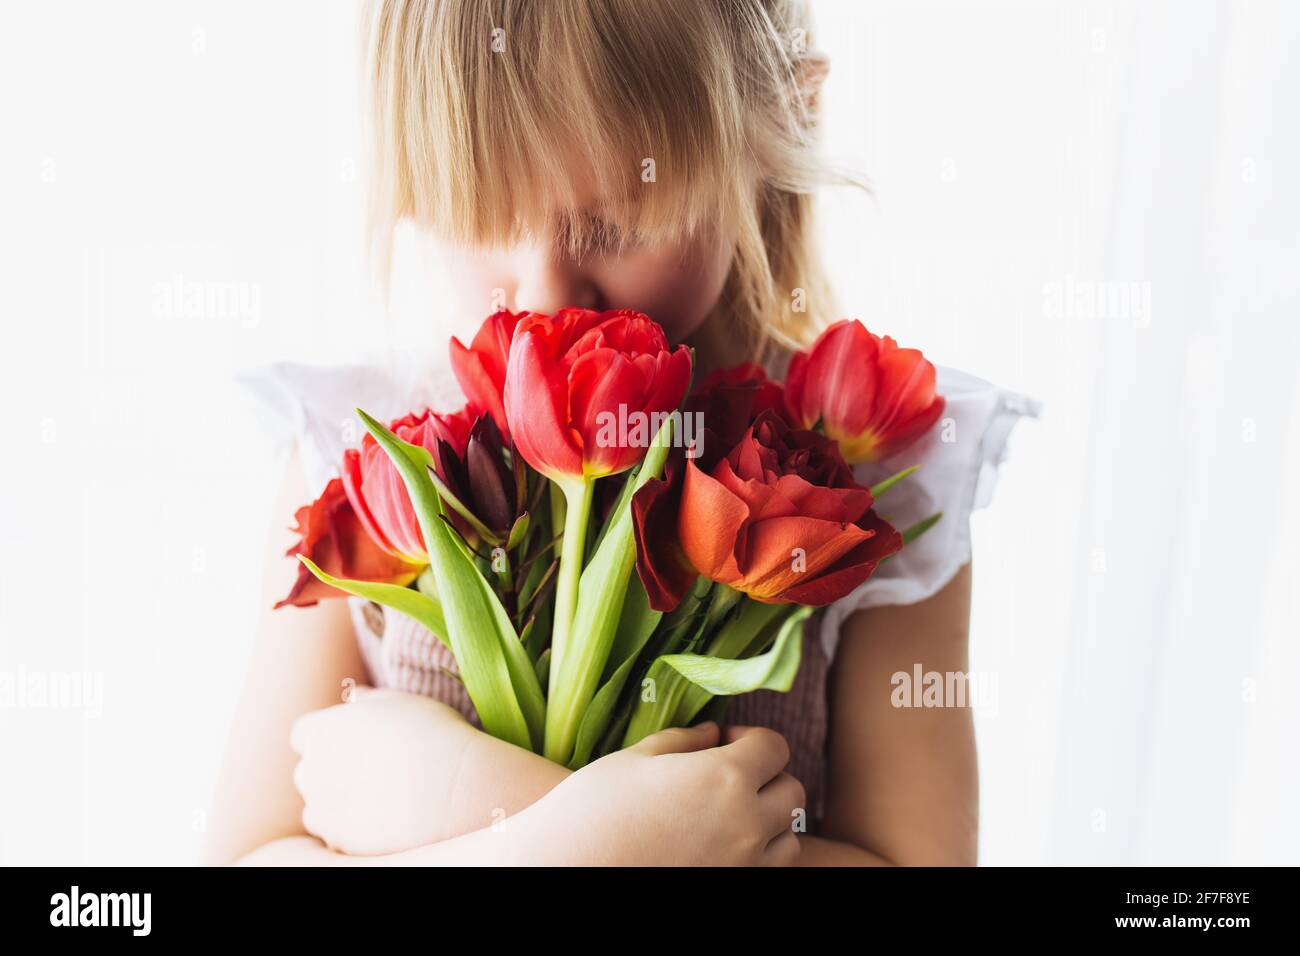 Small smiling girl holding and sniffing bouquet of red tulip flowers. Concept for greeting card for Easter, Mother's day, International women's day, S Stock Photo